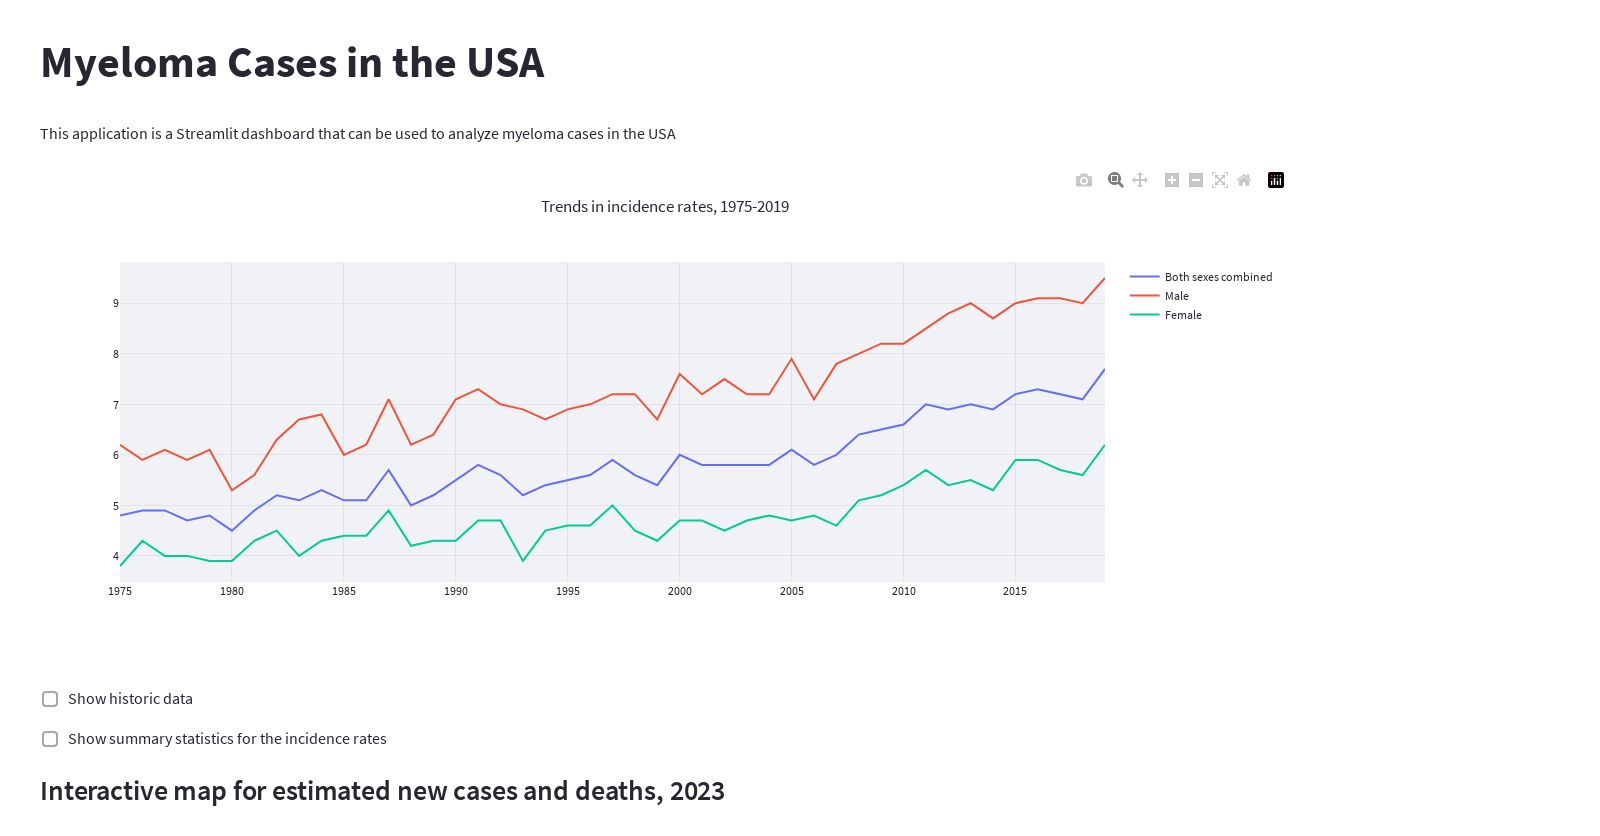 Dashboard to analyze myeloma cases in the USA, with a plot for historic incidence rates and an interactive map for estimated cases and deaths for 2023